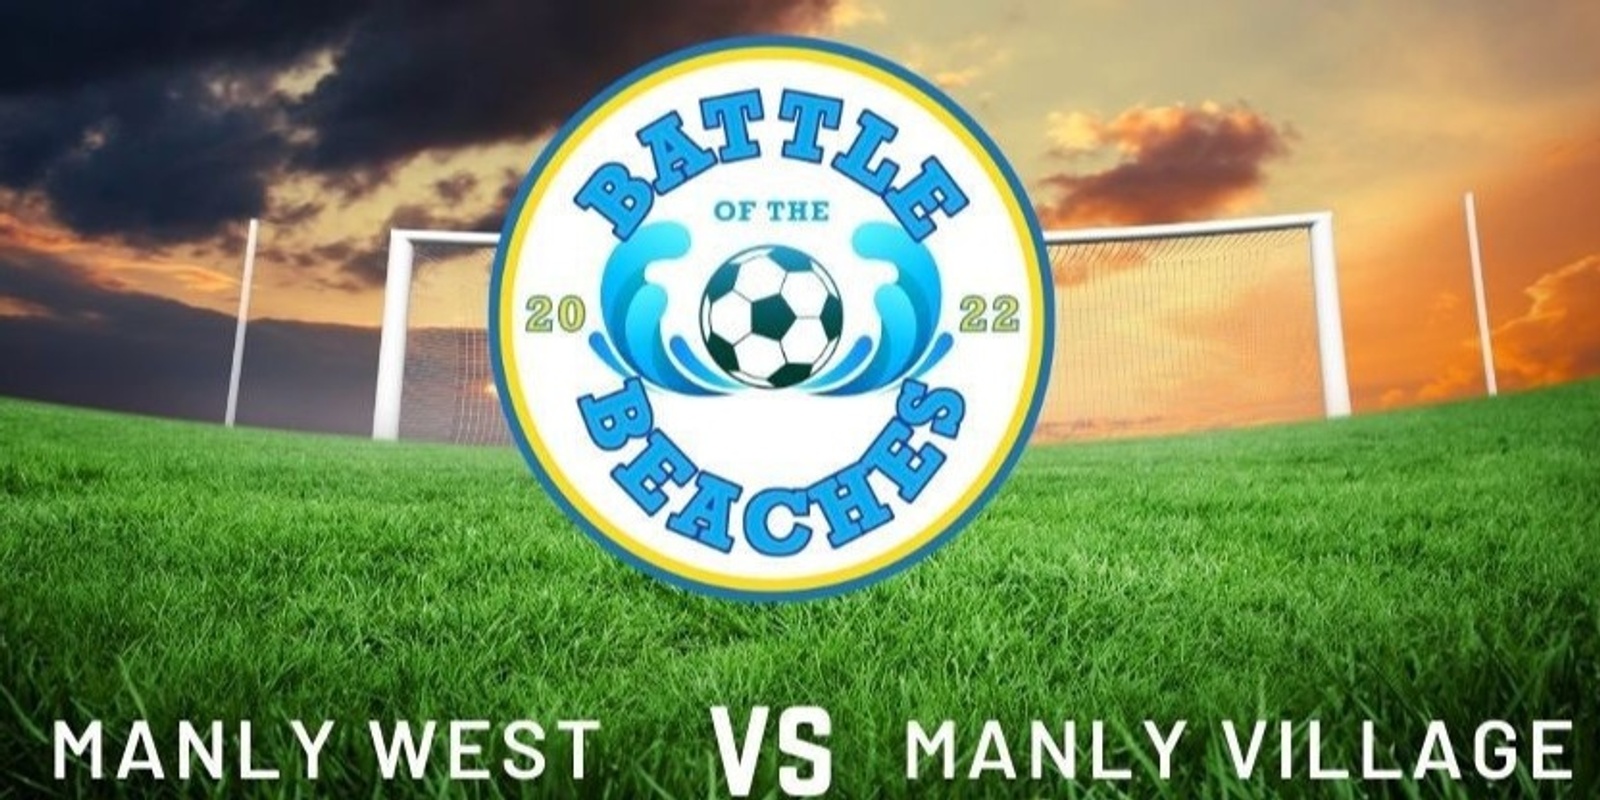 Battle of the Beaches - Manly West Vs Manly Village Soccer Match